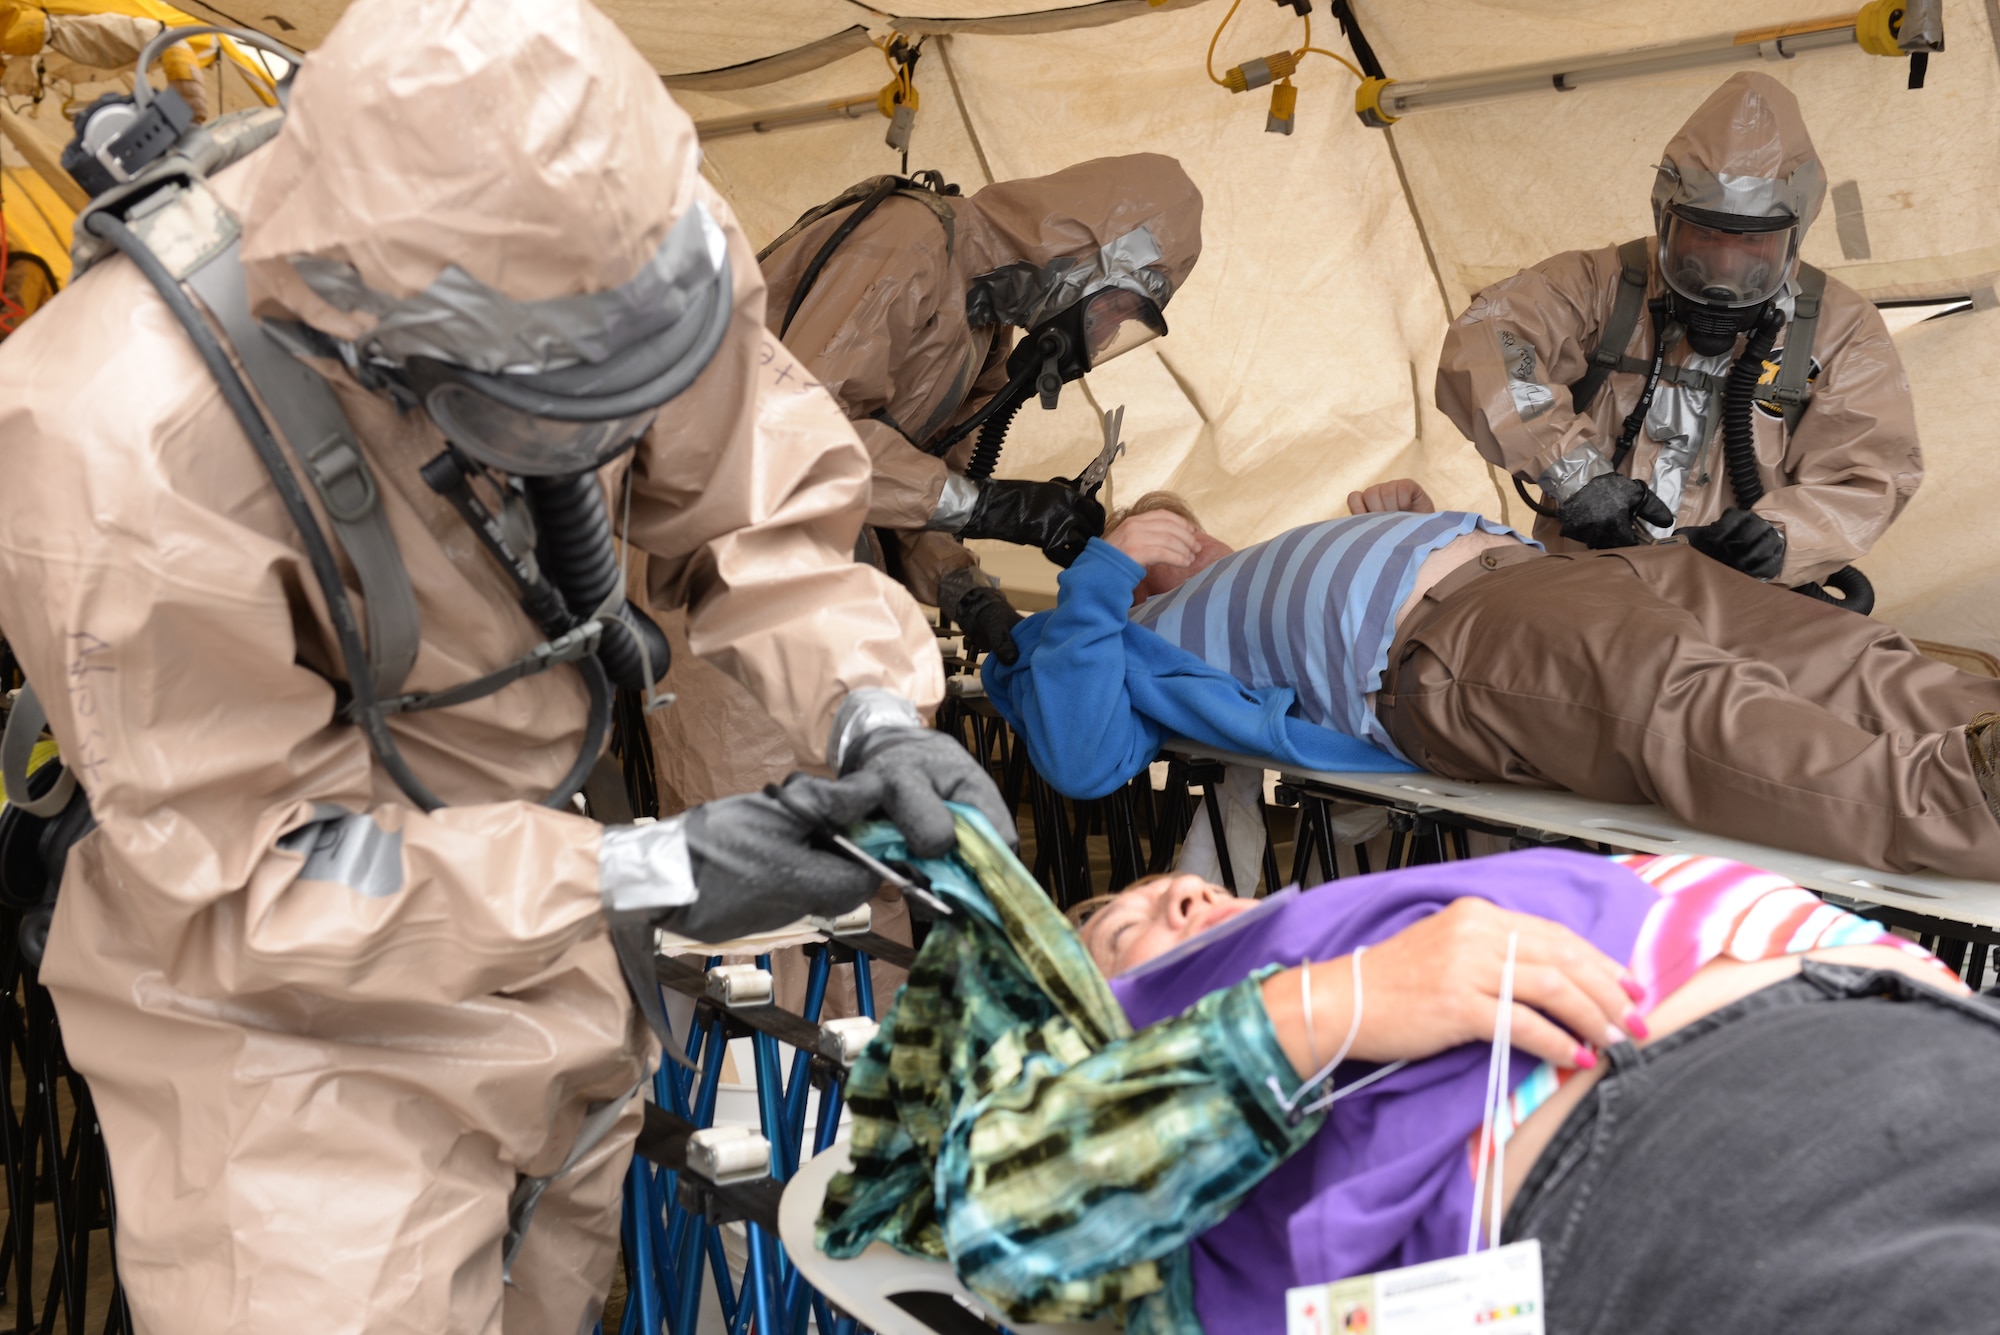 U.S. Colorado National Guard Airmen and Soldiers, cut clothes off simulated civilan victims to train for the joint exercise evaluation (EXEVAL), where they will be evaluated for wartime readiness at Camp Rilea, Warrenton, Oregon, Aug. 2, 2016. This portion of the evaluation was mid-week, where the pace picked up moderately and led into the most demanding challenge on the fifth day, the evaluation. (U.S. Air National Guard photo by Staff Sgt. Bobbie Reynolds) 